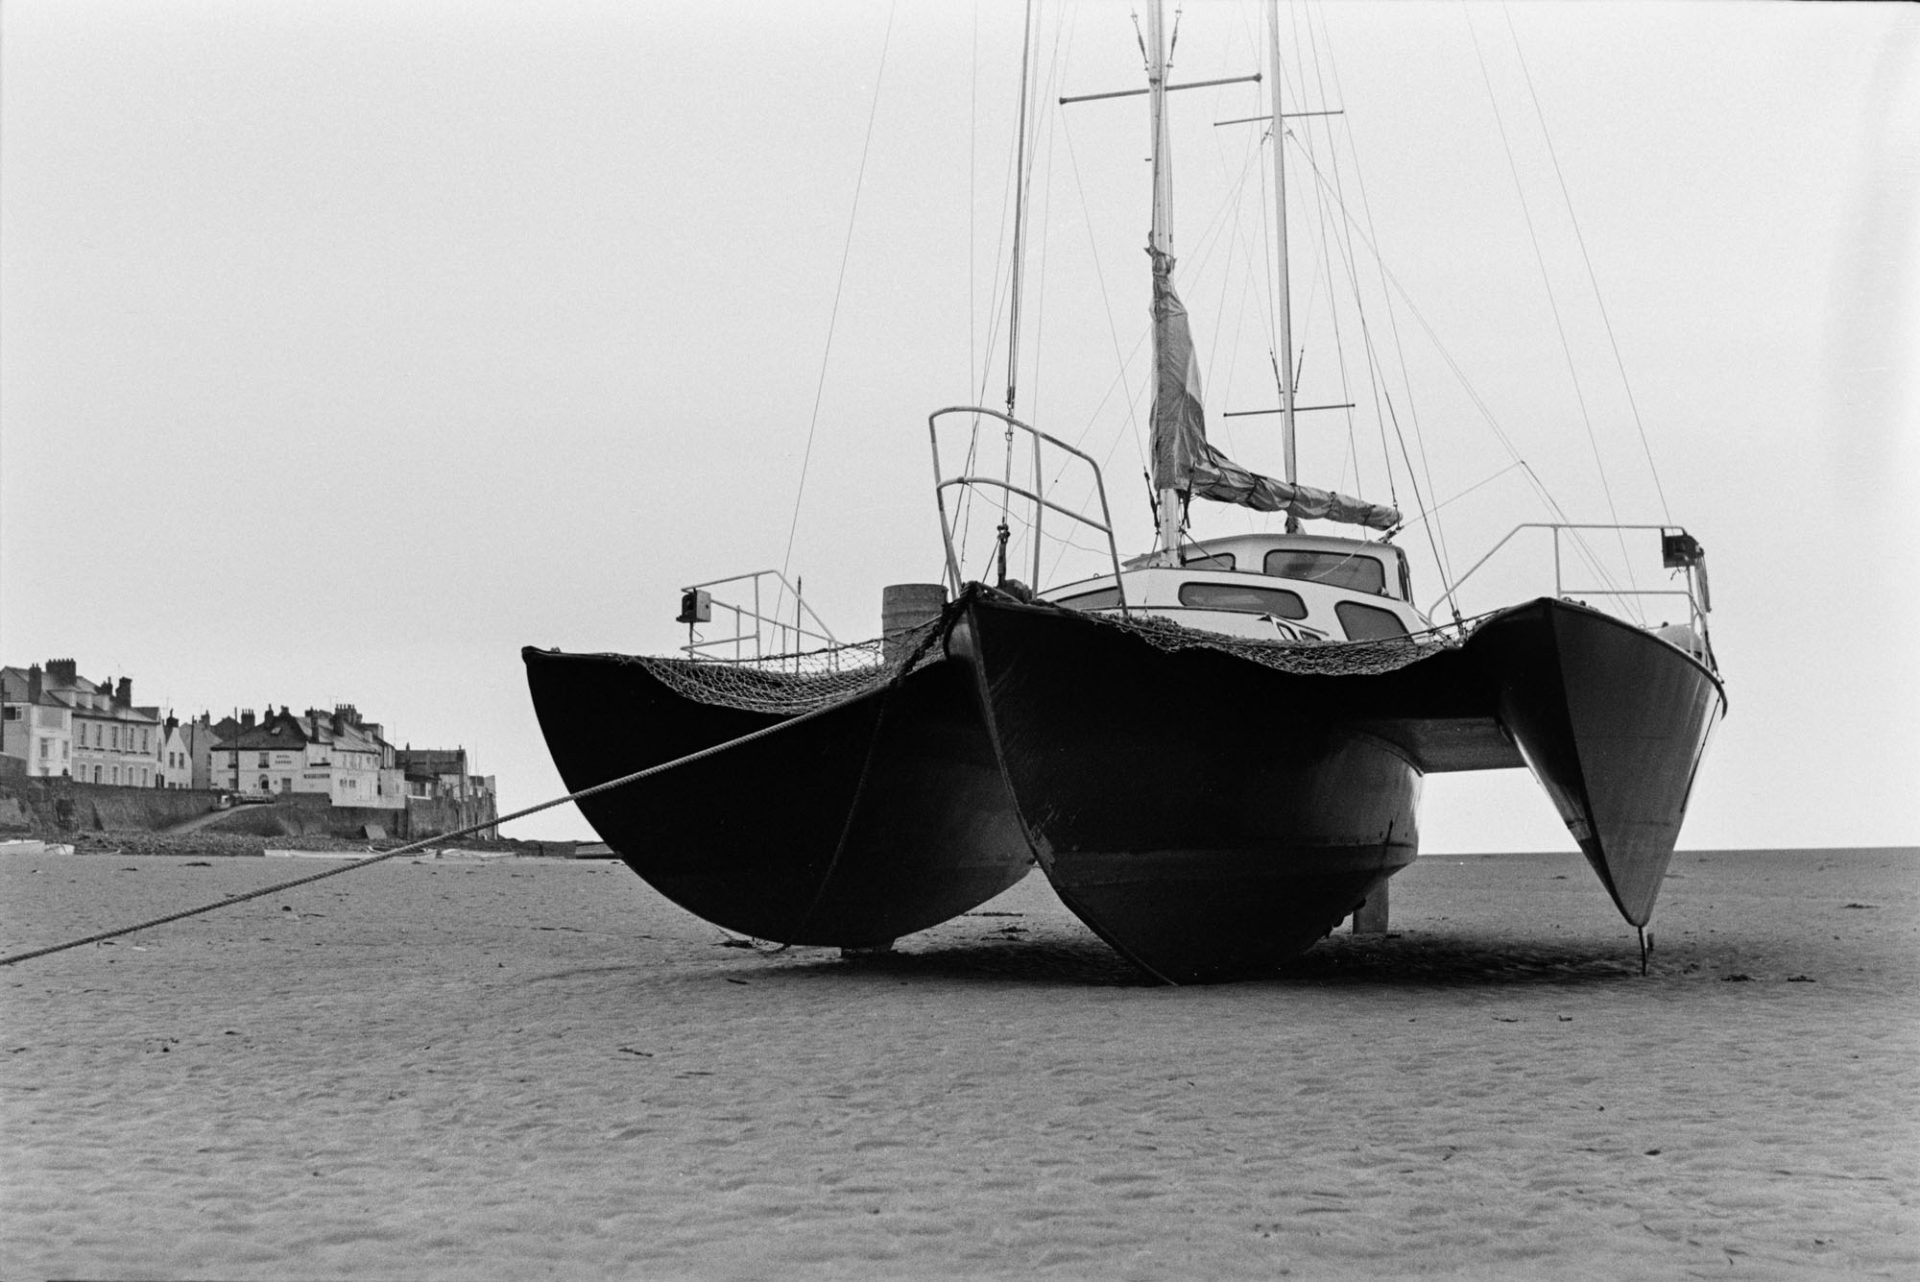 A trimaran or three hulled boat moored on the beach at Appledore.